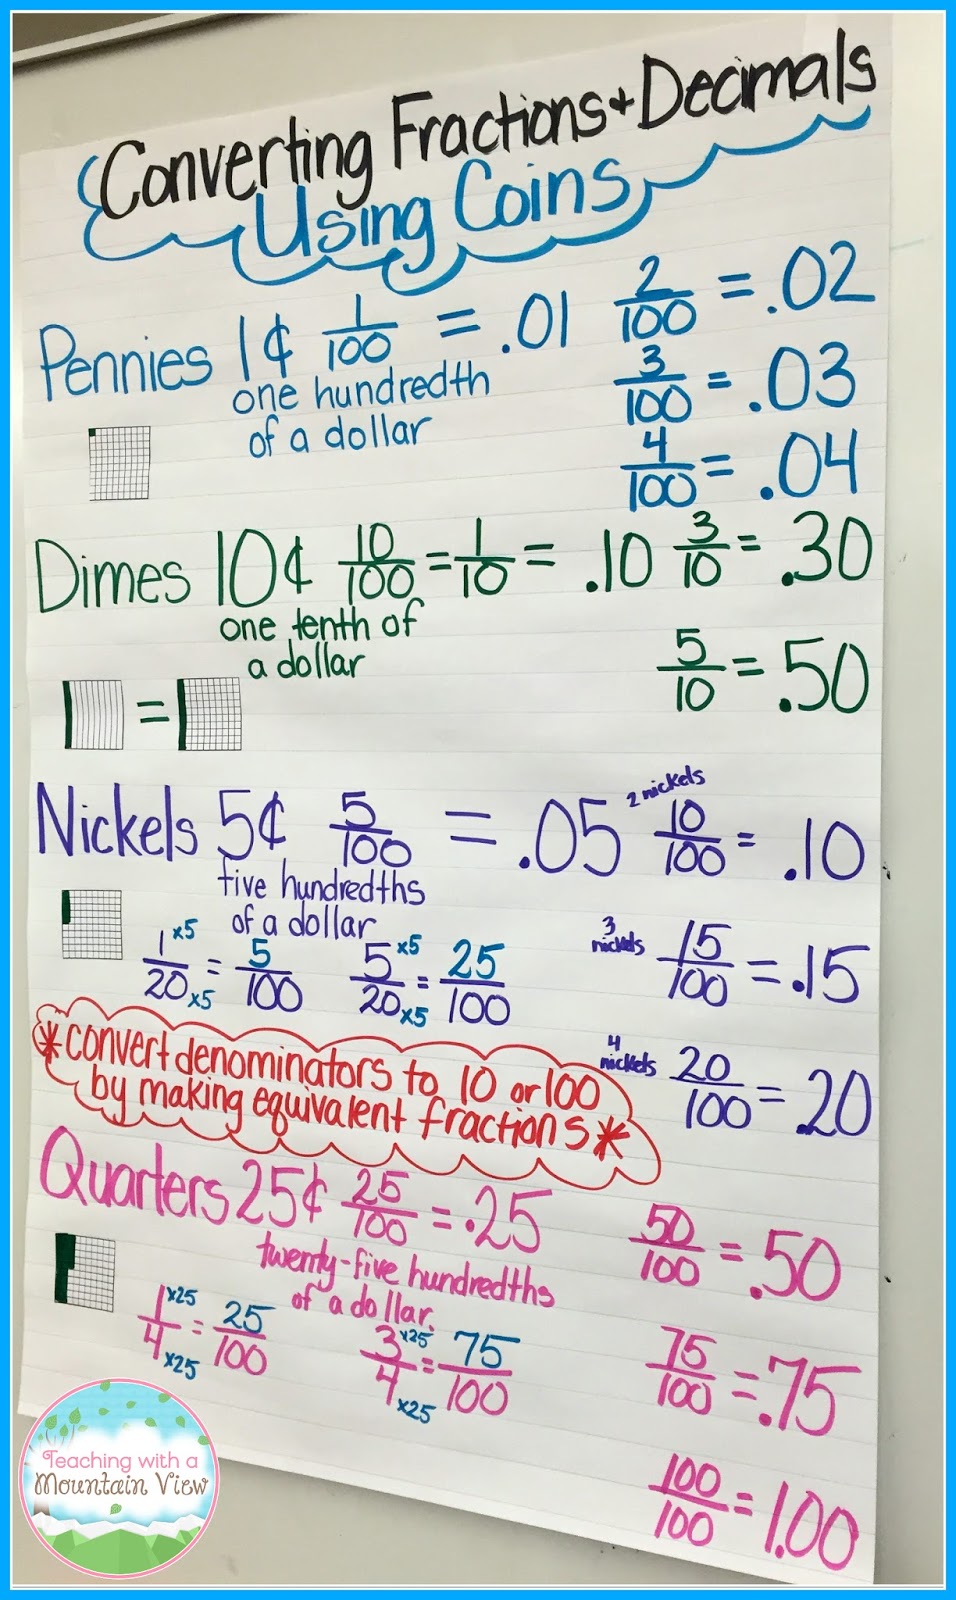 Teaching With a Mountain View: Converting Fractions to Decimals